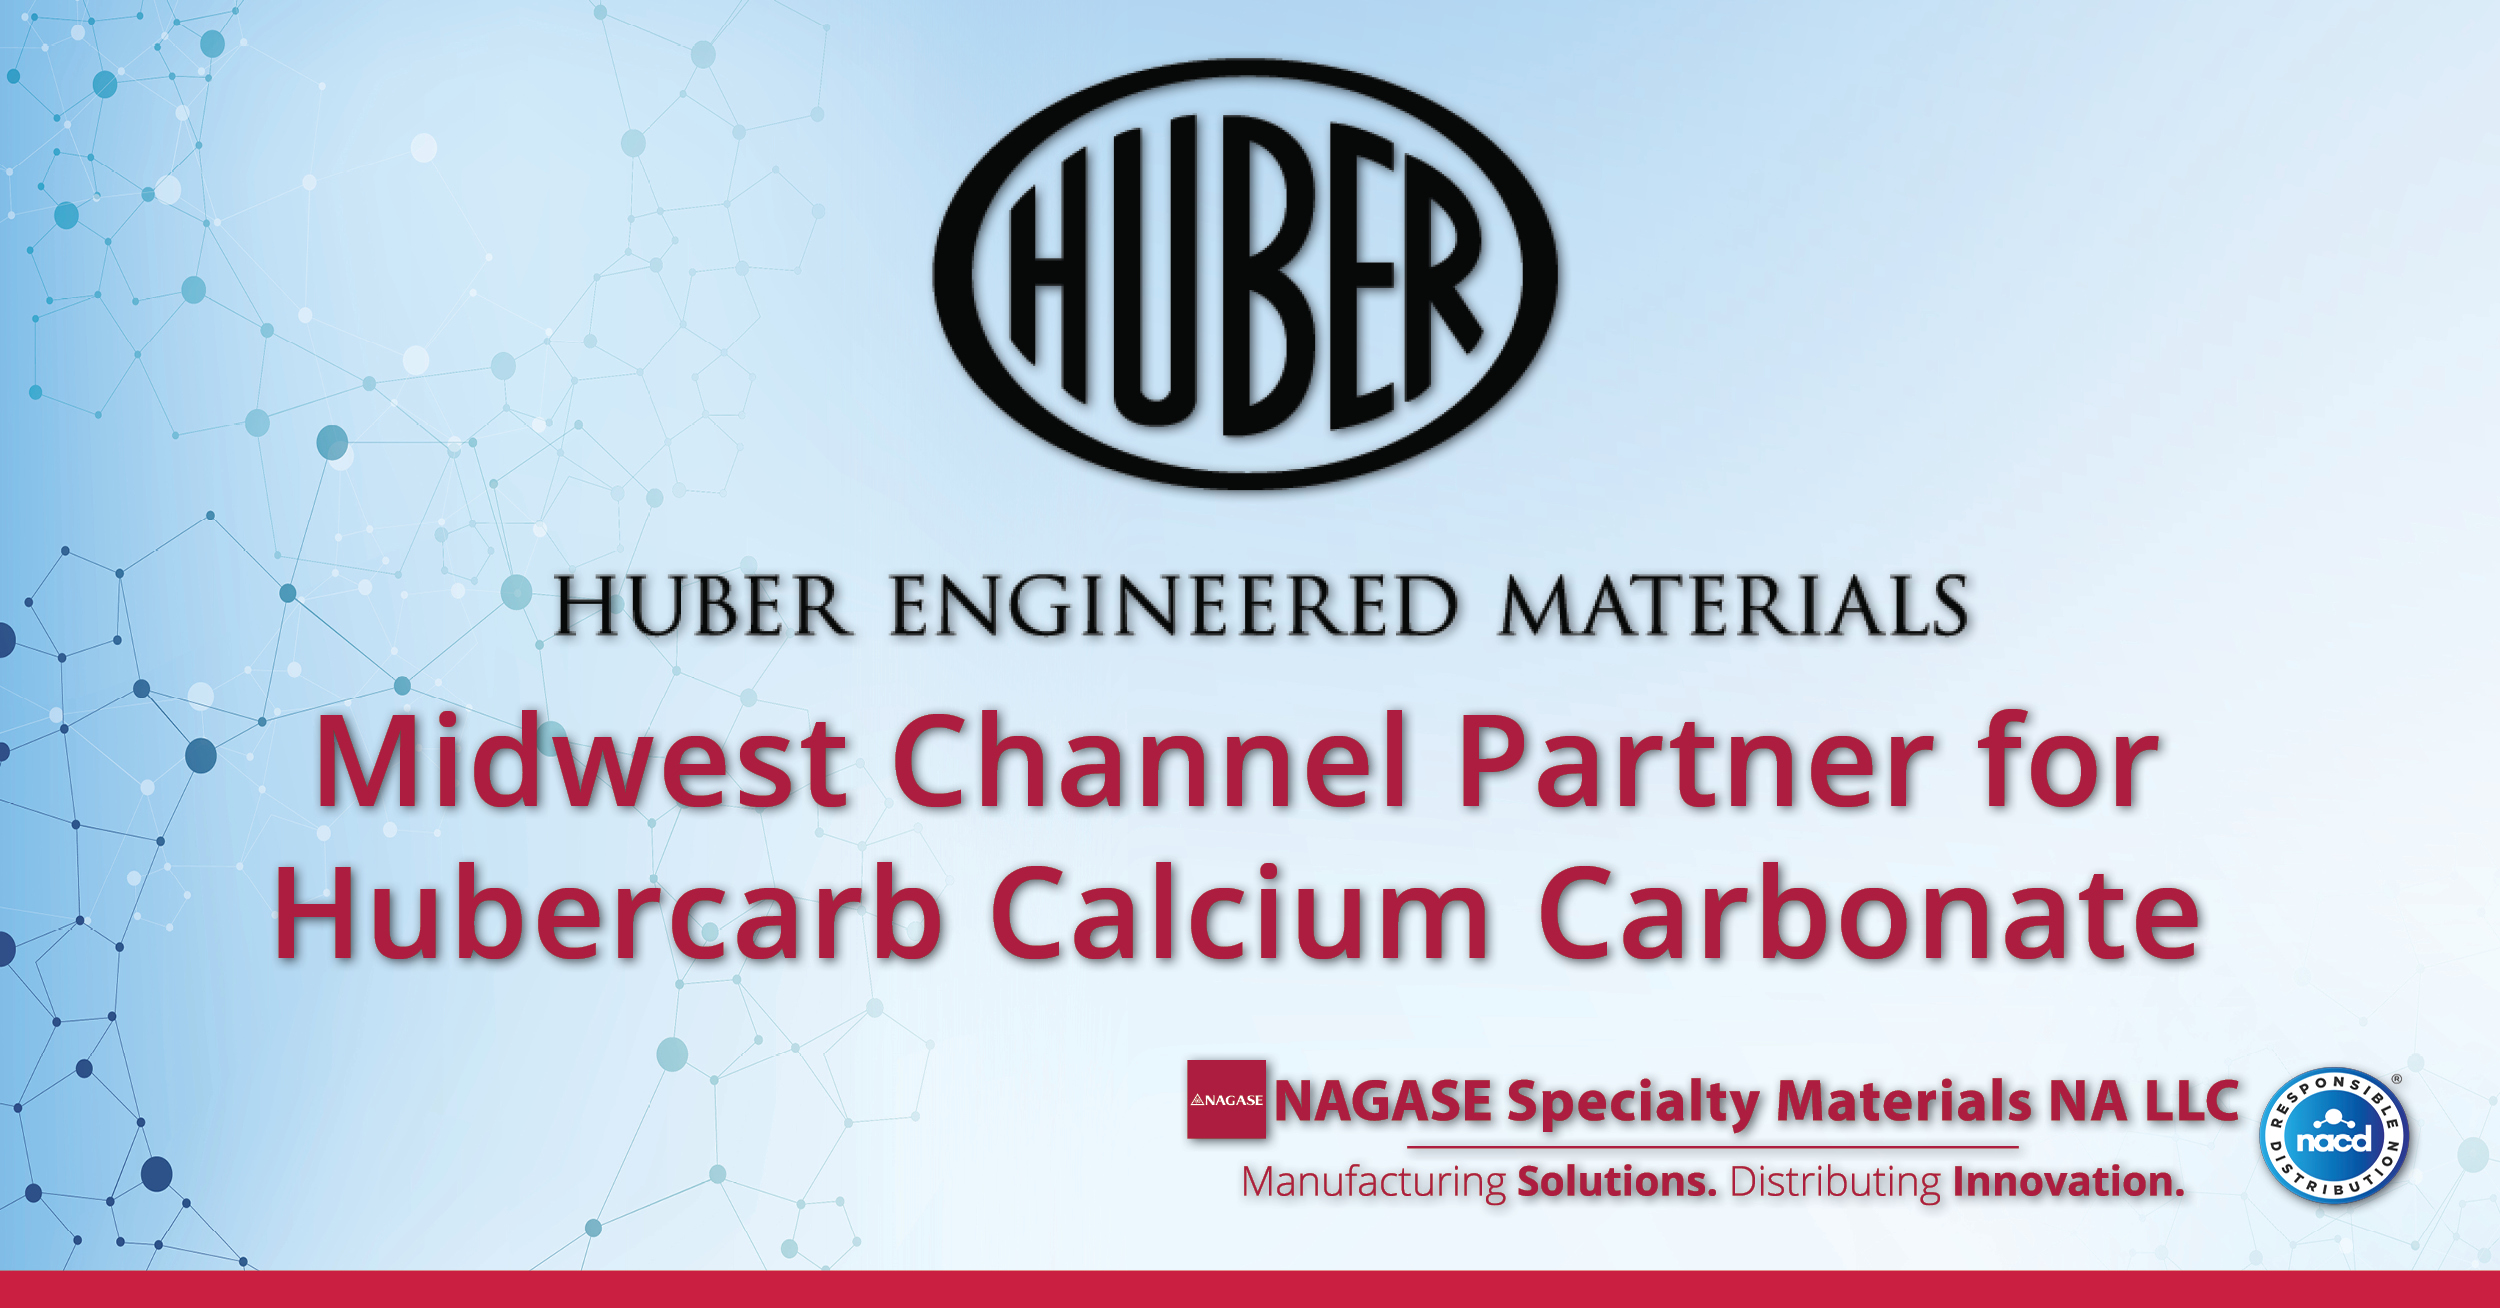 NAGASE Specialty Materials Partners with Huber Calcium Carbonates